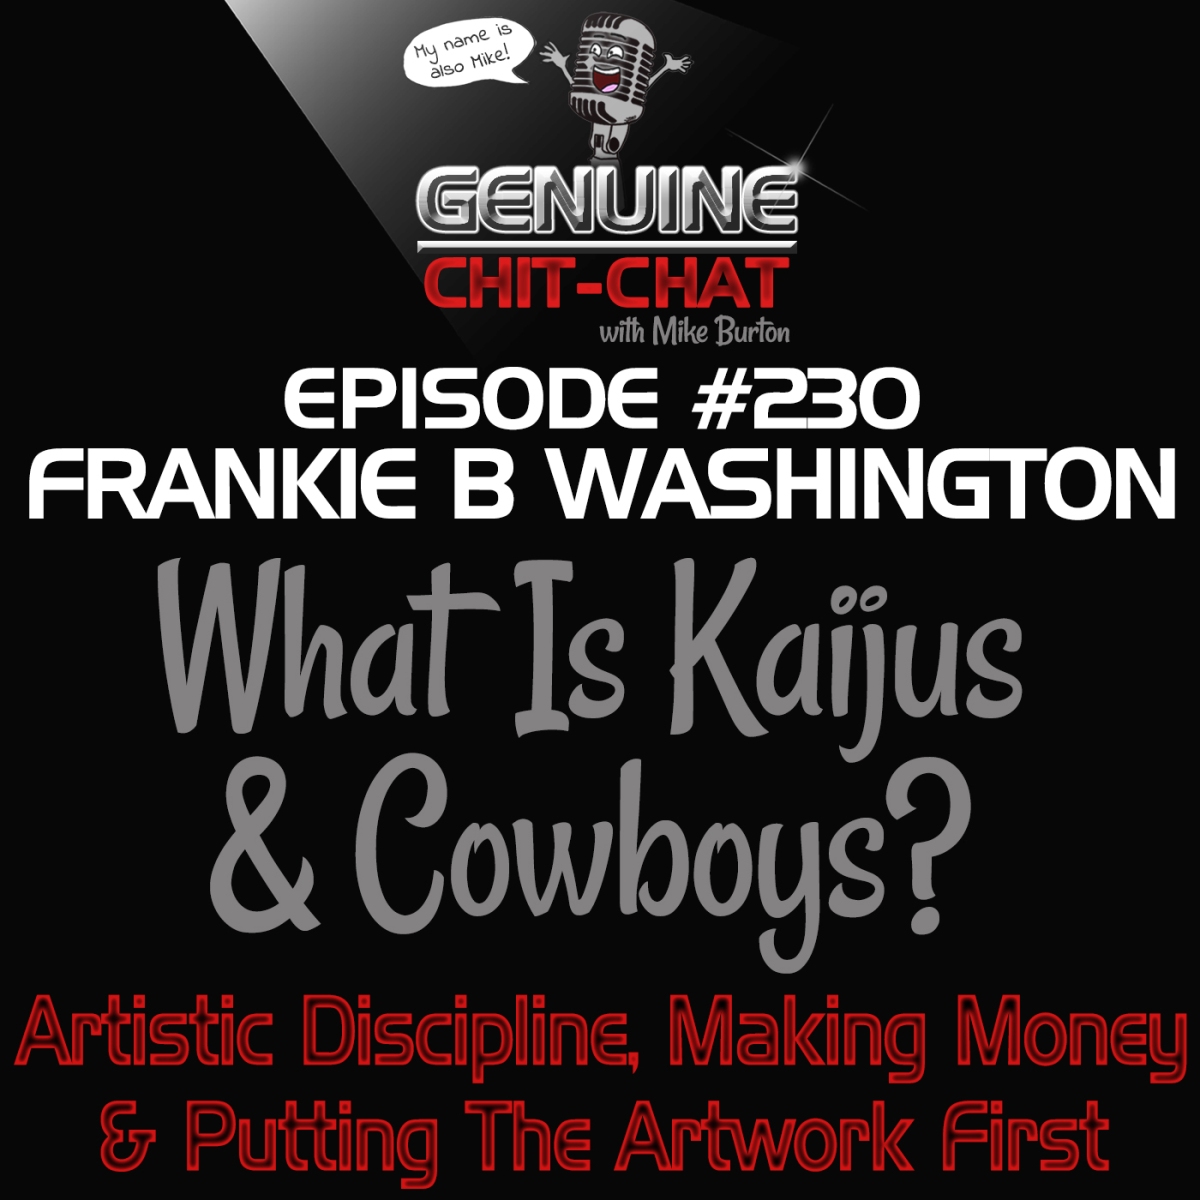 #230 – What Is Kaijus & Cowboys? Artistic Discipline, Making Money & Putting The Artwork First With Frankie B Washington